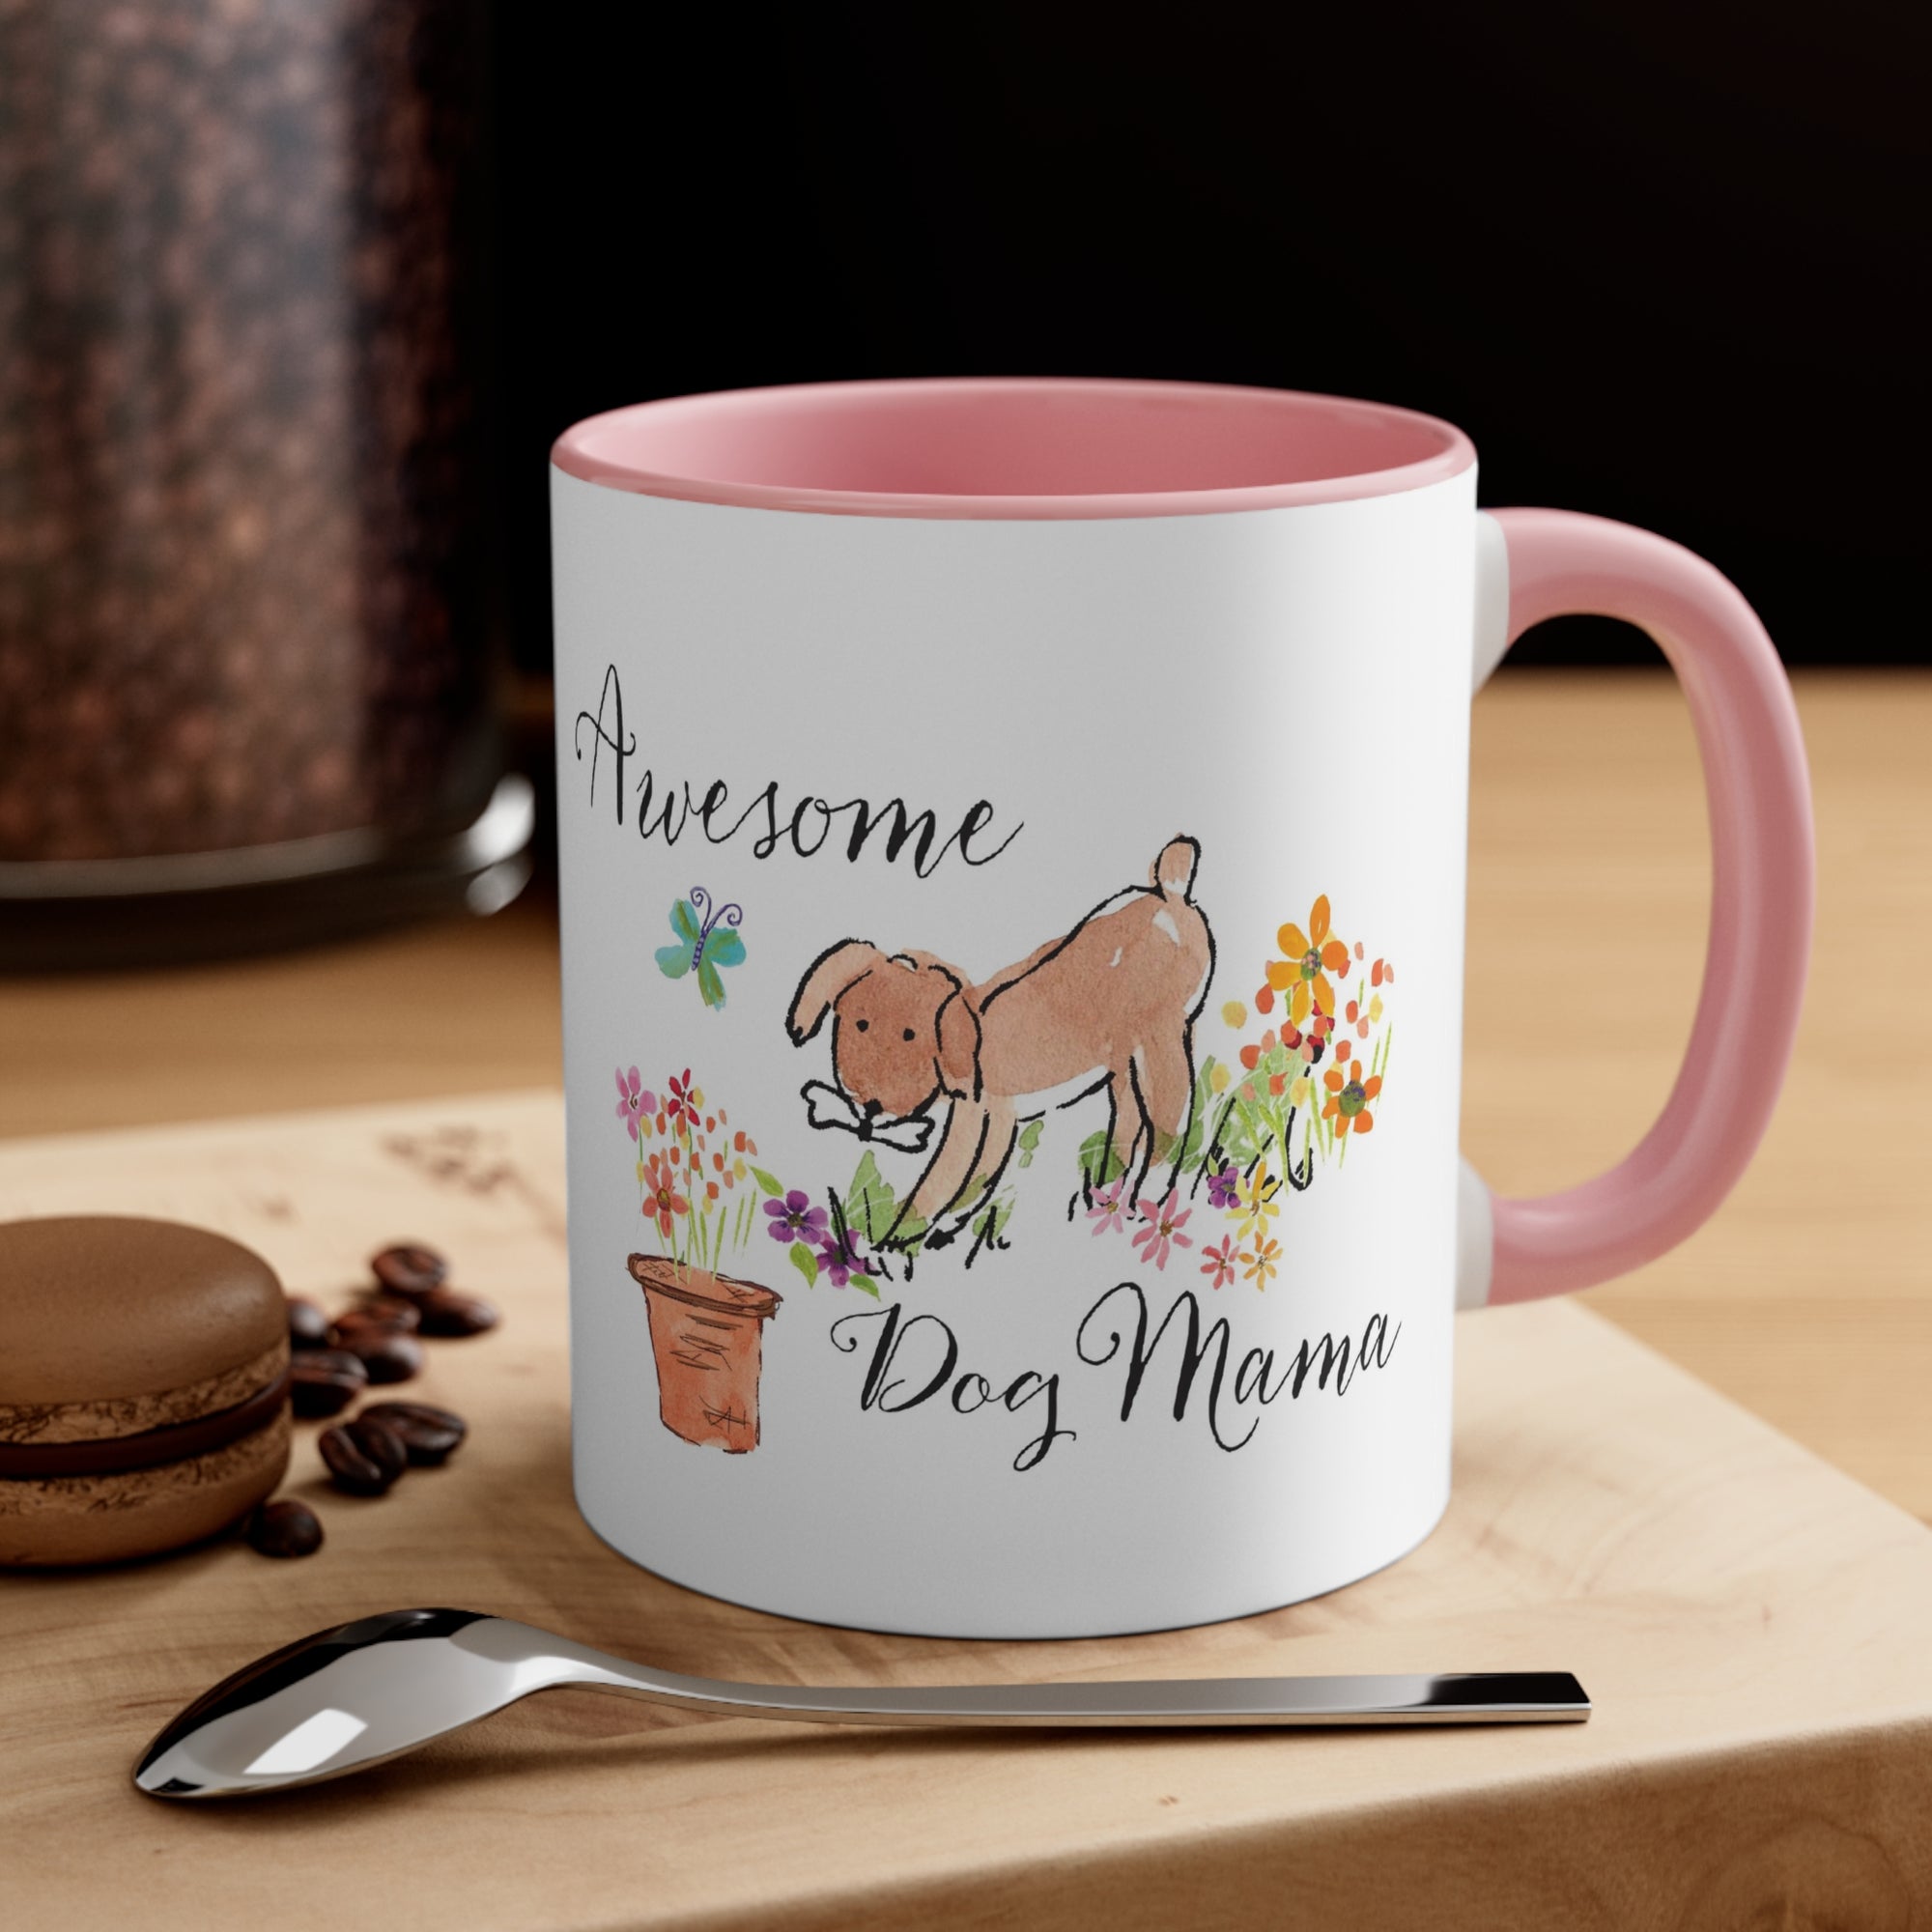 Awesome Dog Mama Pink or Red Accent Coffee Mug, 11oz